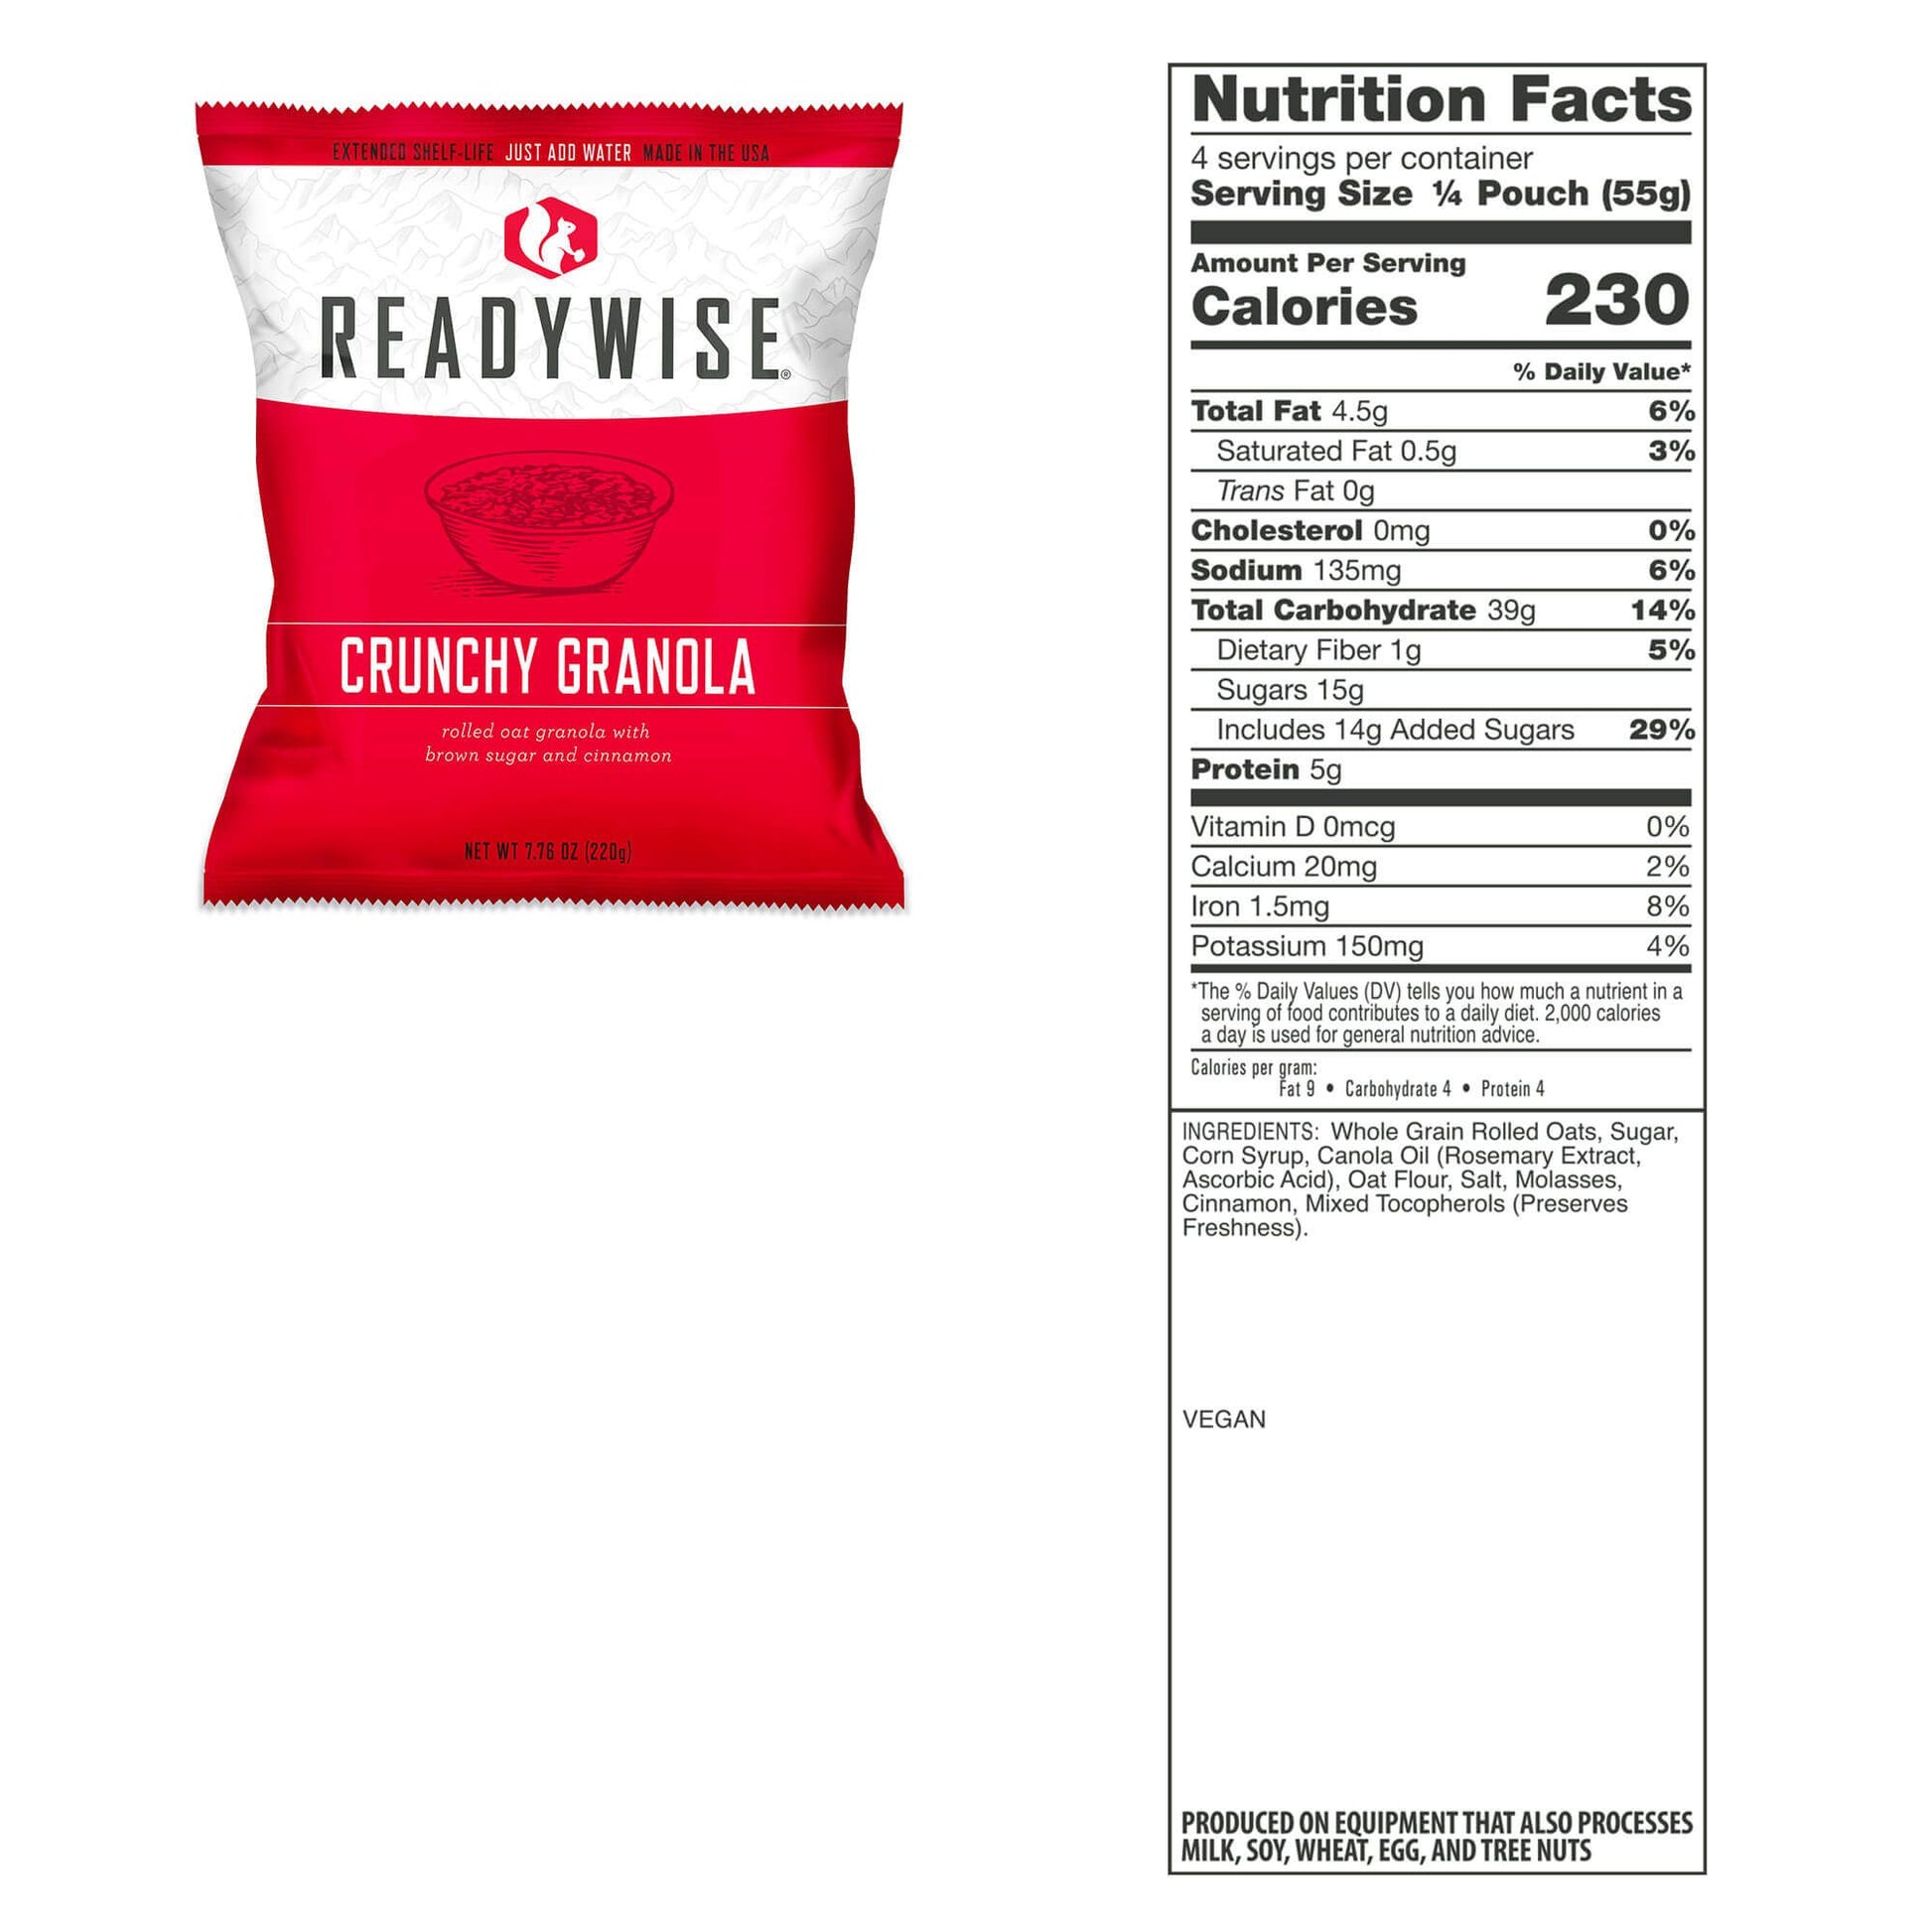 Crunchy Granola packet with nutritional information